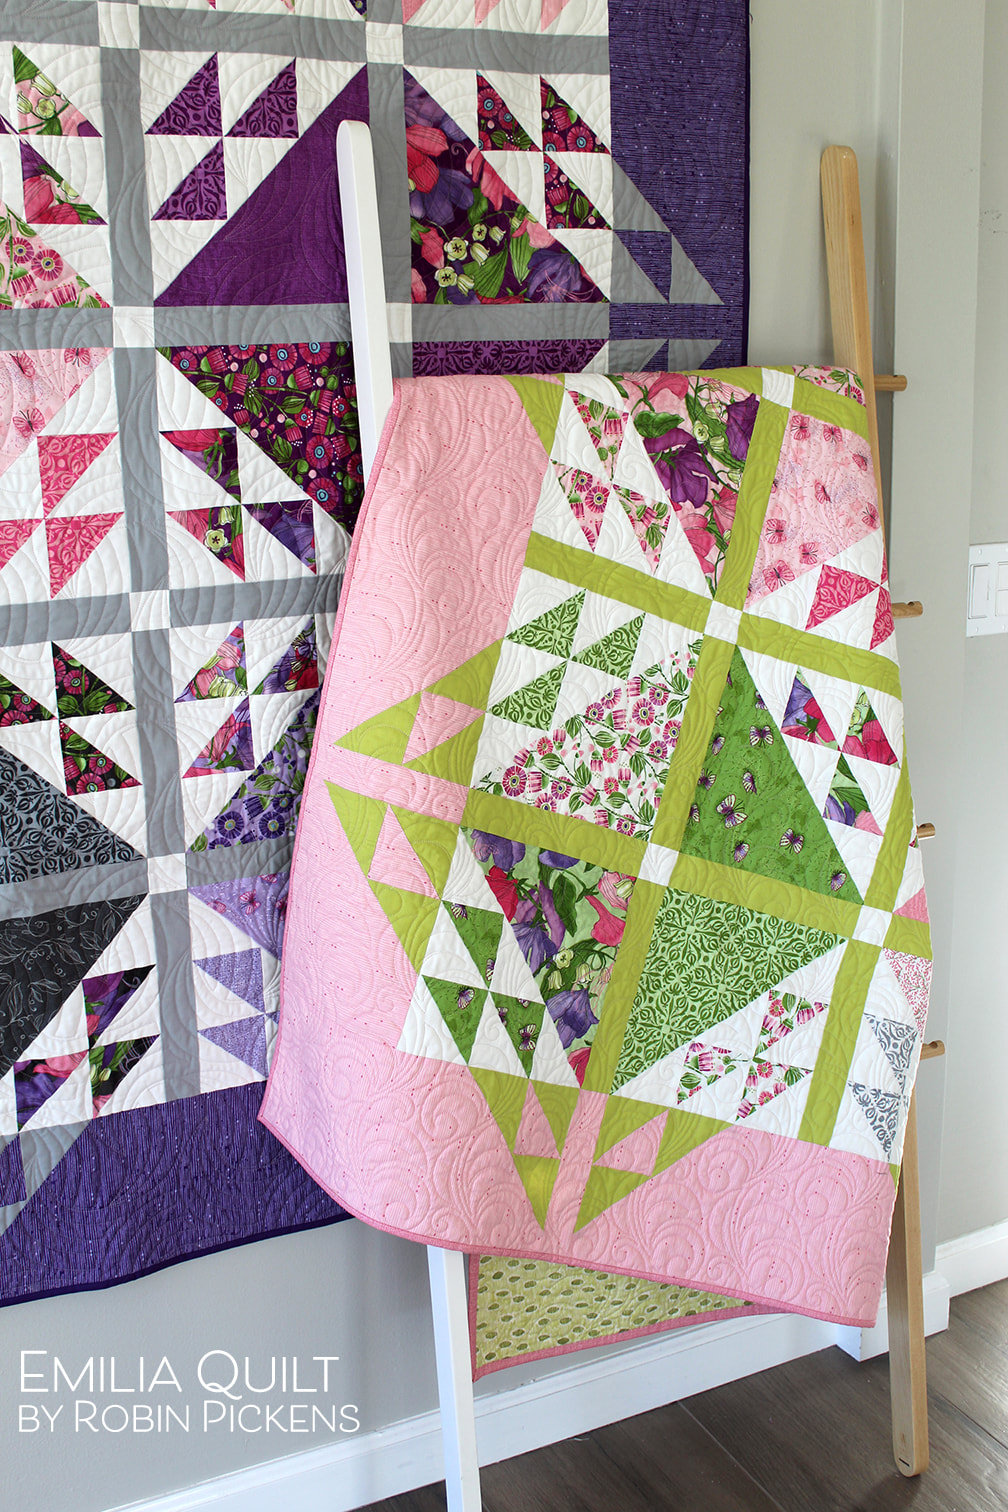 Emilia quilt by Robin Pickens with Sweet Pea and Lily Moda fabrics